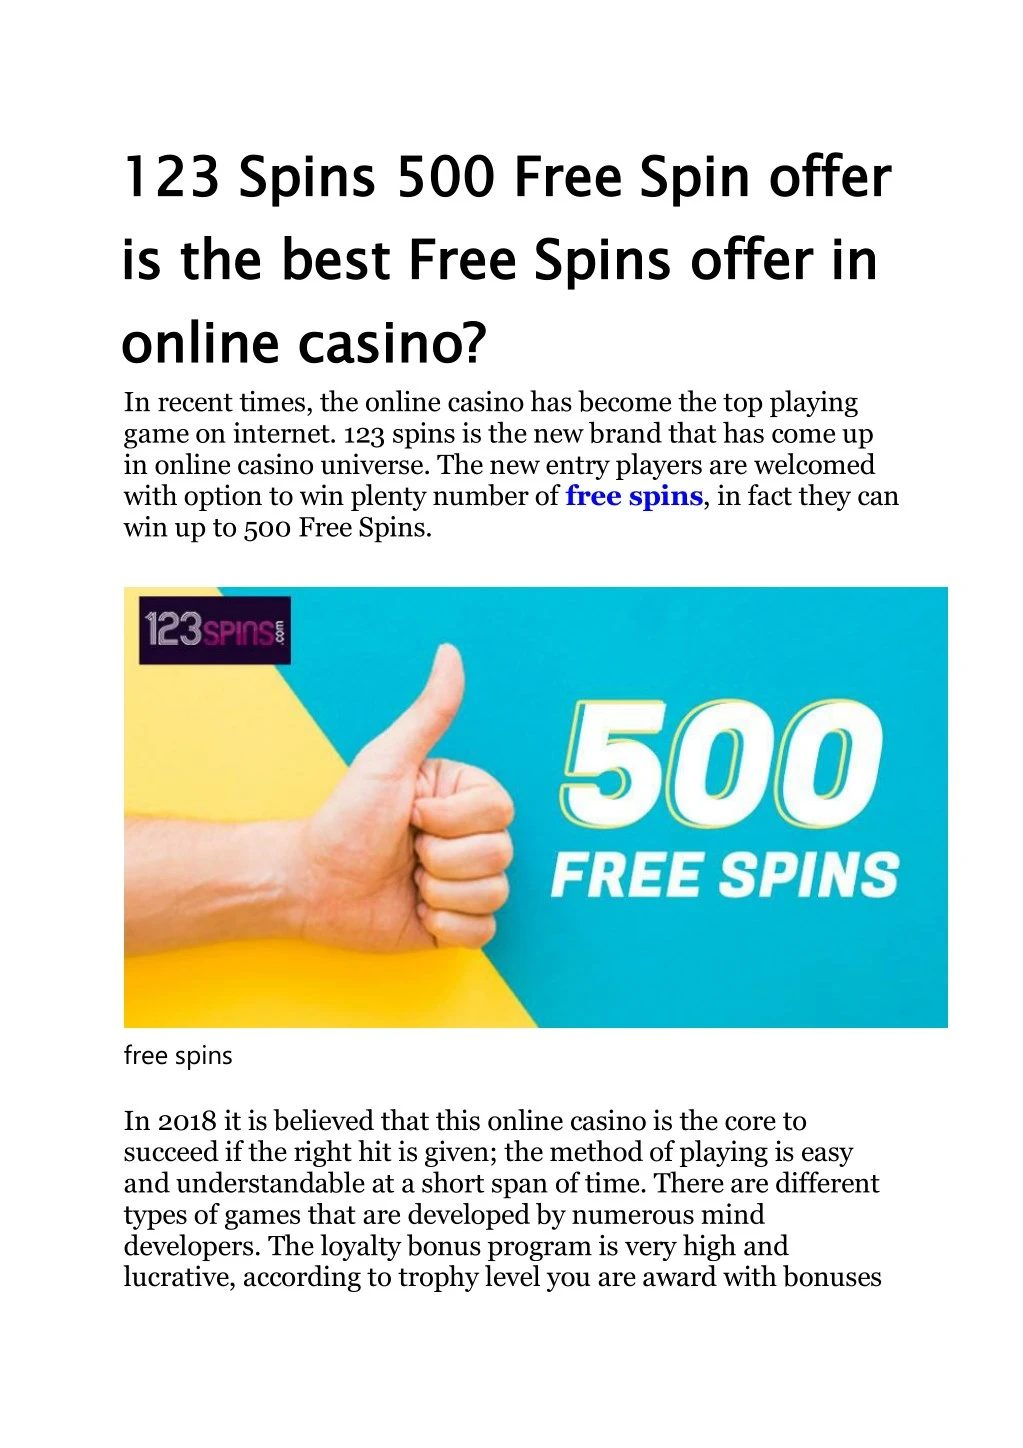 123 spins 500 free spin offer is the best free